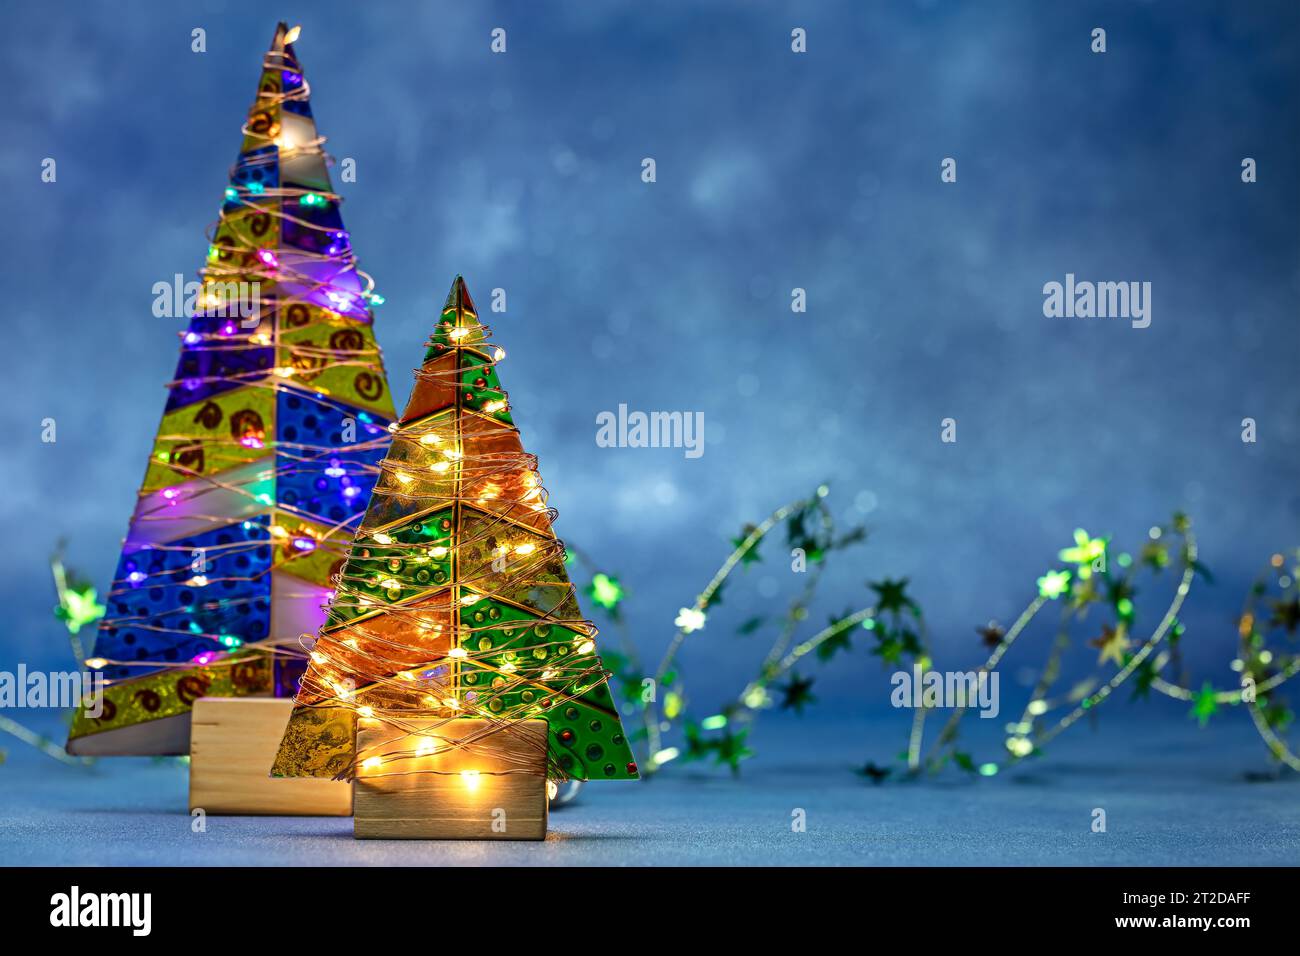 festive decorated christmas trees with glowing holiday garlands lights. Stock Photo